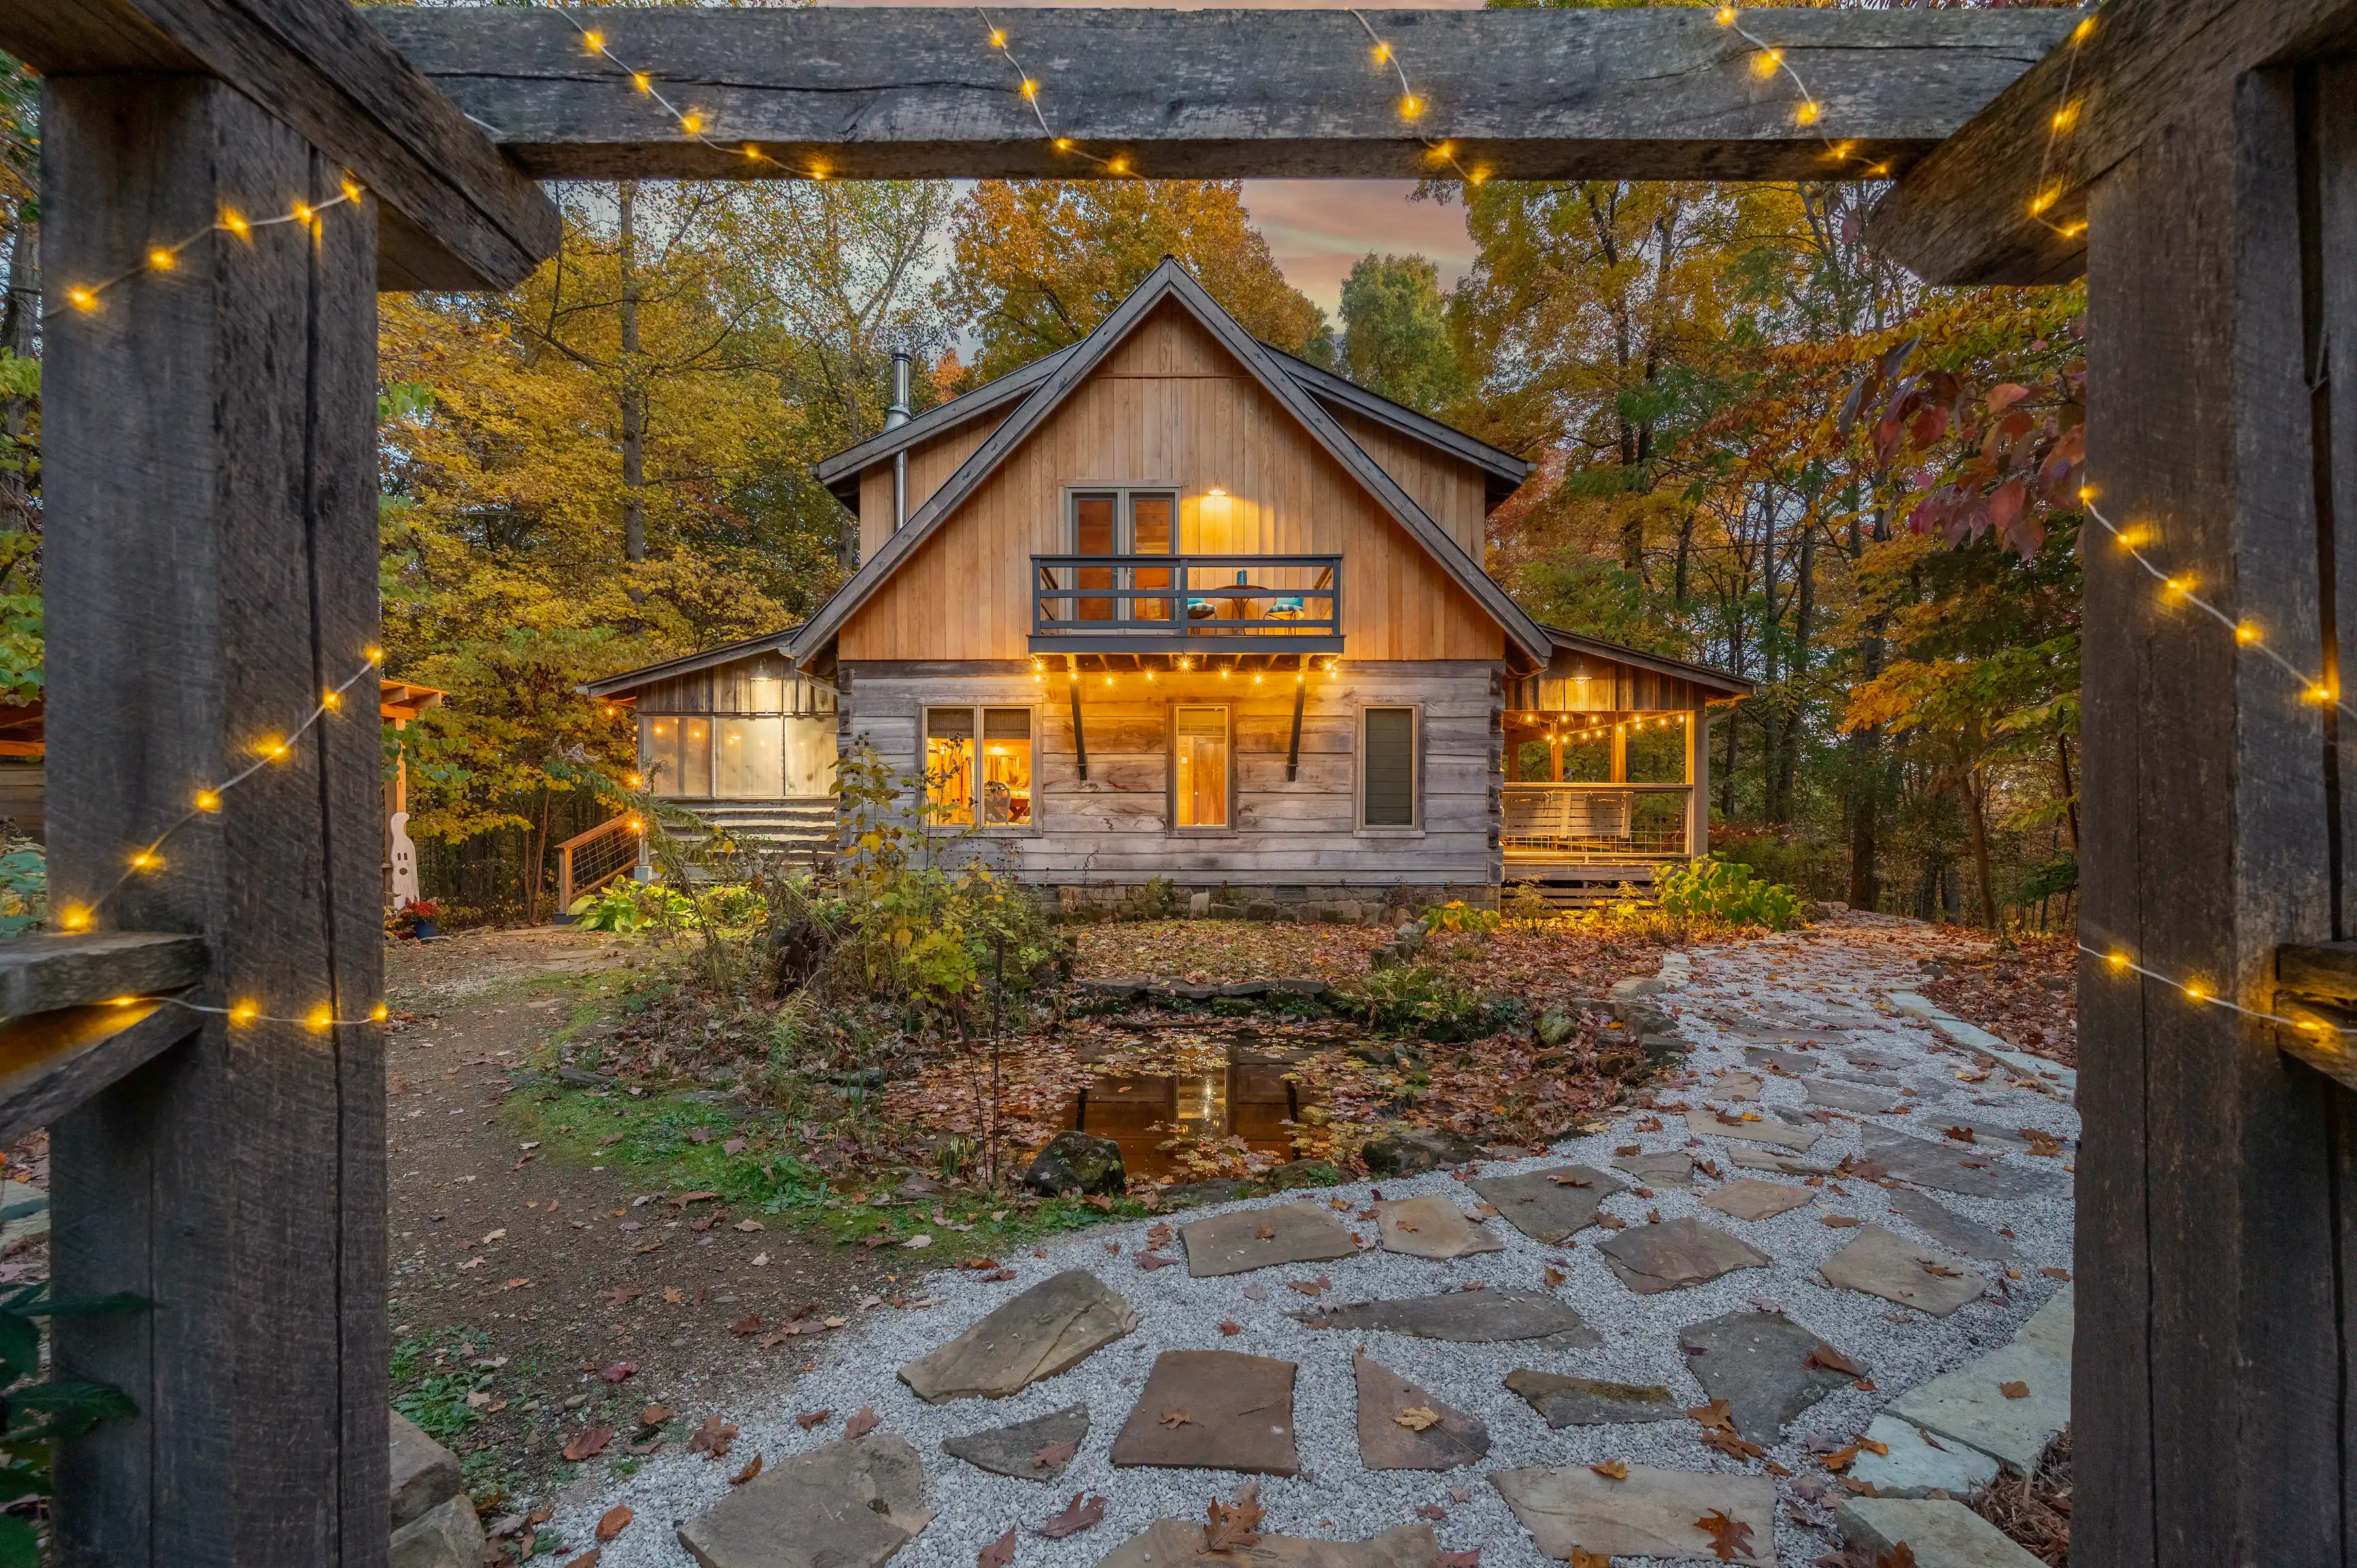 Cozy wooden cabin with lit interior and string lights at dusk, framed by a pergola, surrounded by autumn foliage.